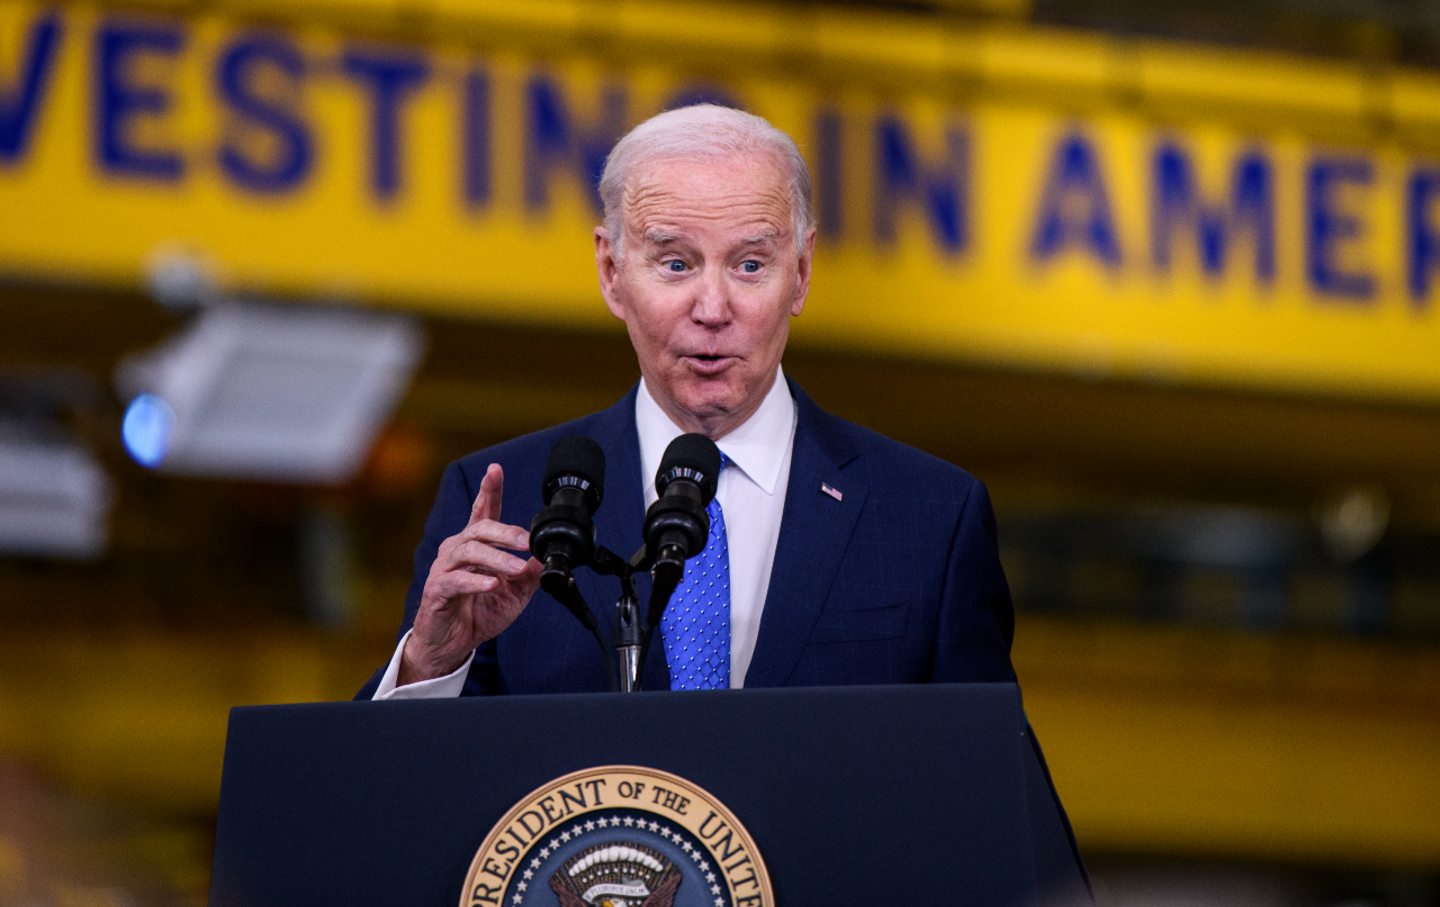 President Joe Biden speaks during a visit to Fridley, Minn., as part of his administration’s “Investing in America” tour on April 3, 2023.